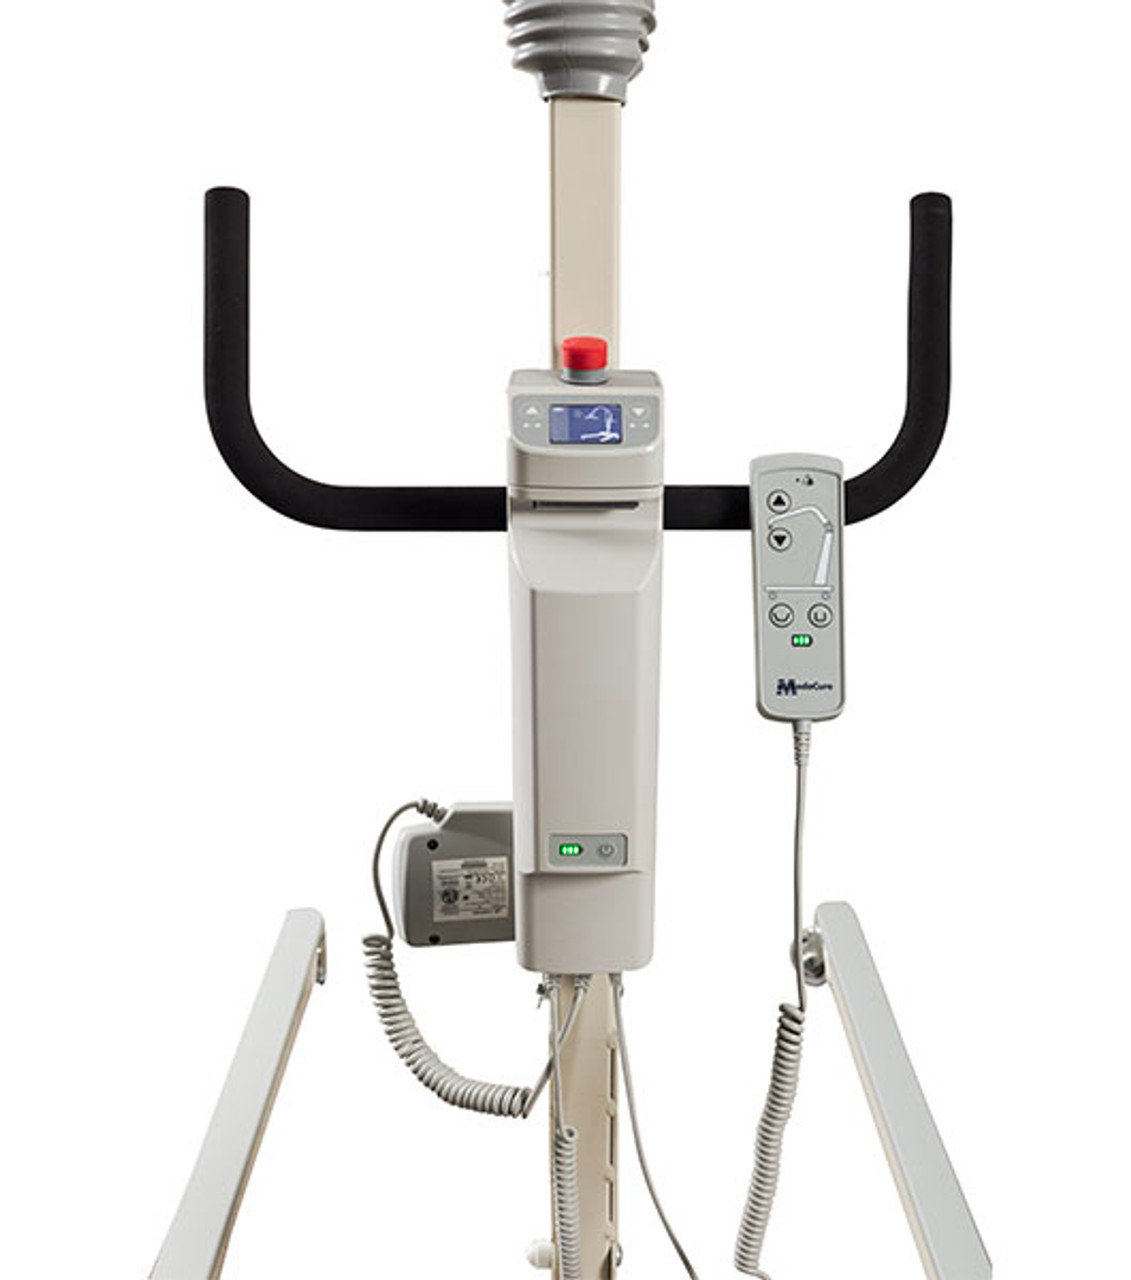 Heavy-Duty Bariatric Powered Patient Lift | 660lb Capacity, Padded Sling Bar-Chicken Pieces